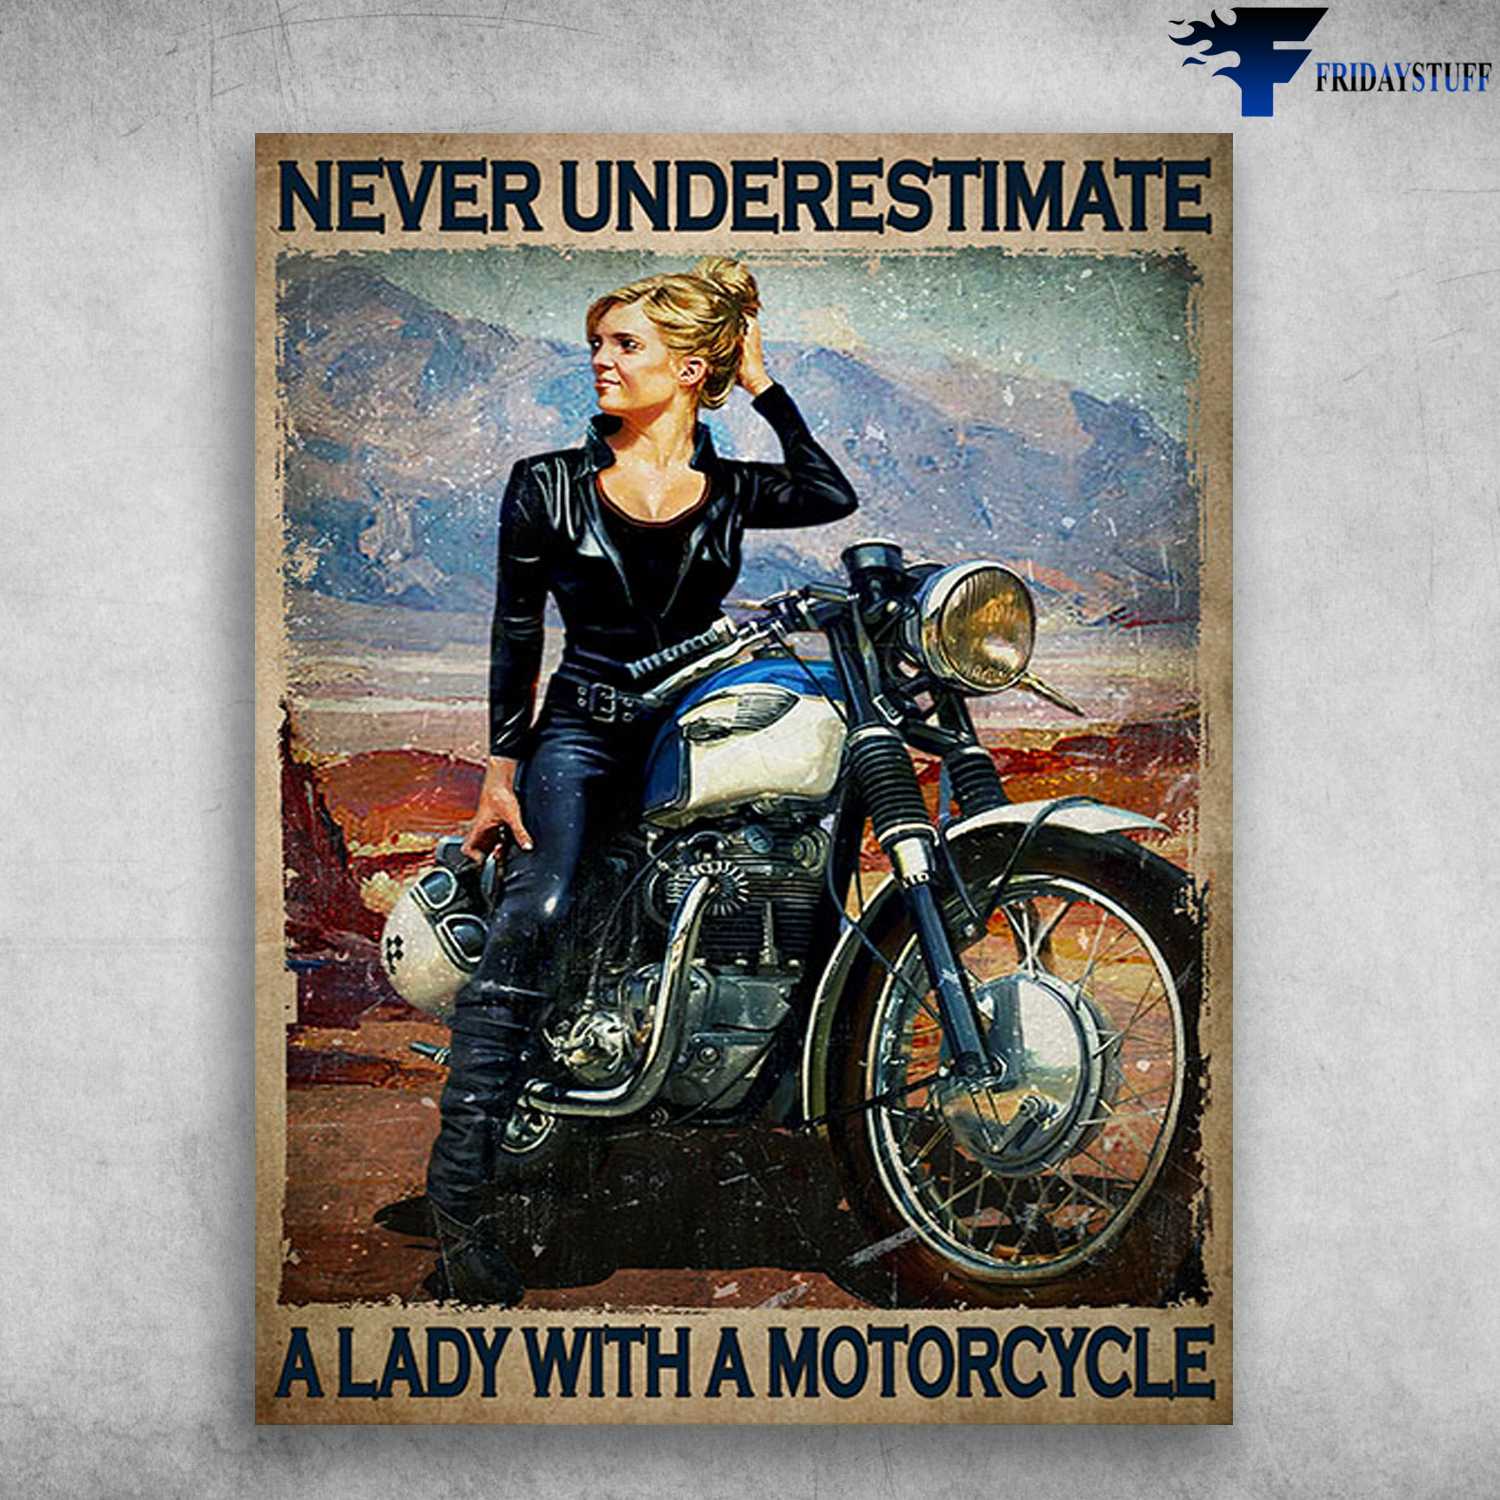 Motorcycle Lady, Biker Poster - Never Underestimate, A Lady With A Motorcycle